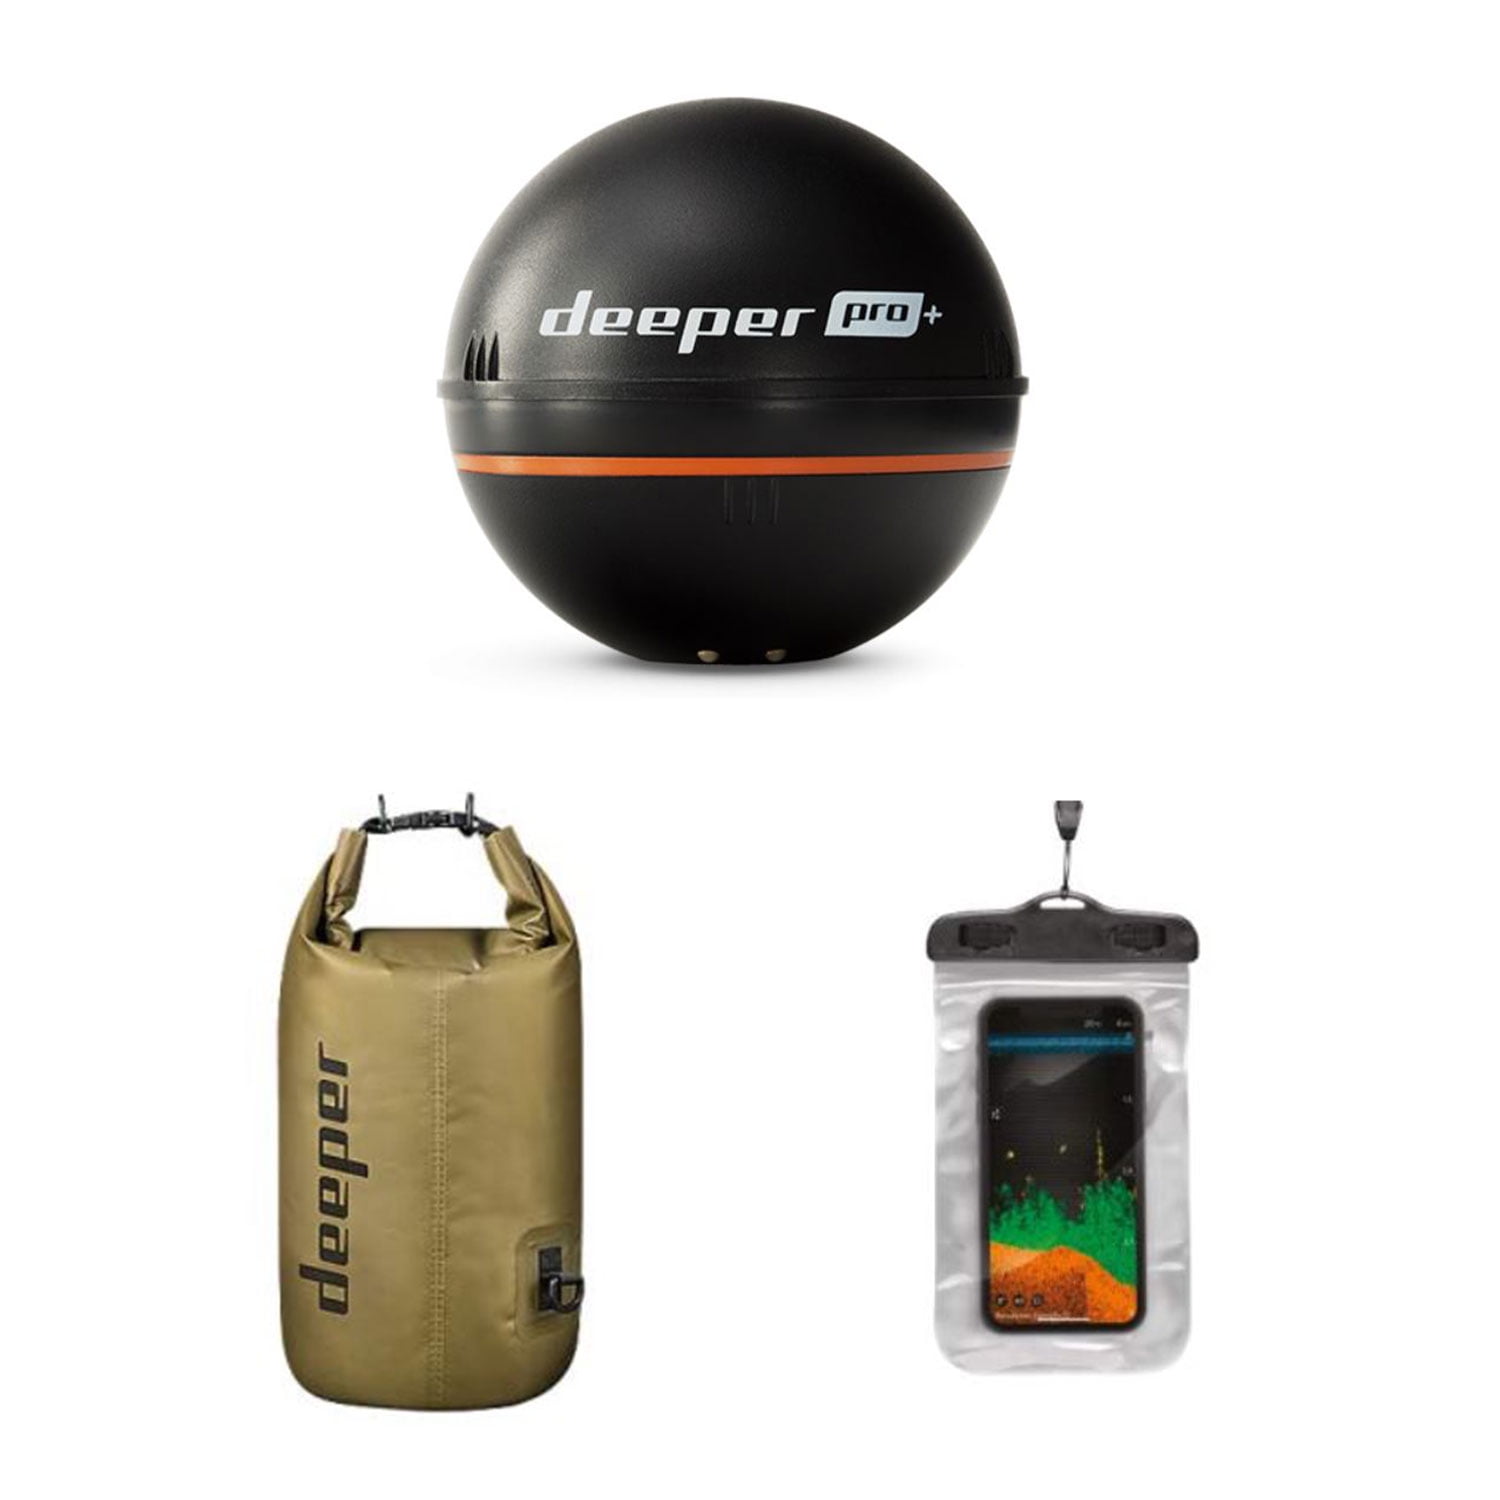 Deeper Pro+ Castable Fish Finder Sonar Bundle with Dry Bag and Phone Case 